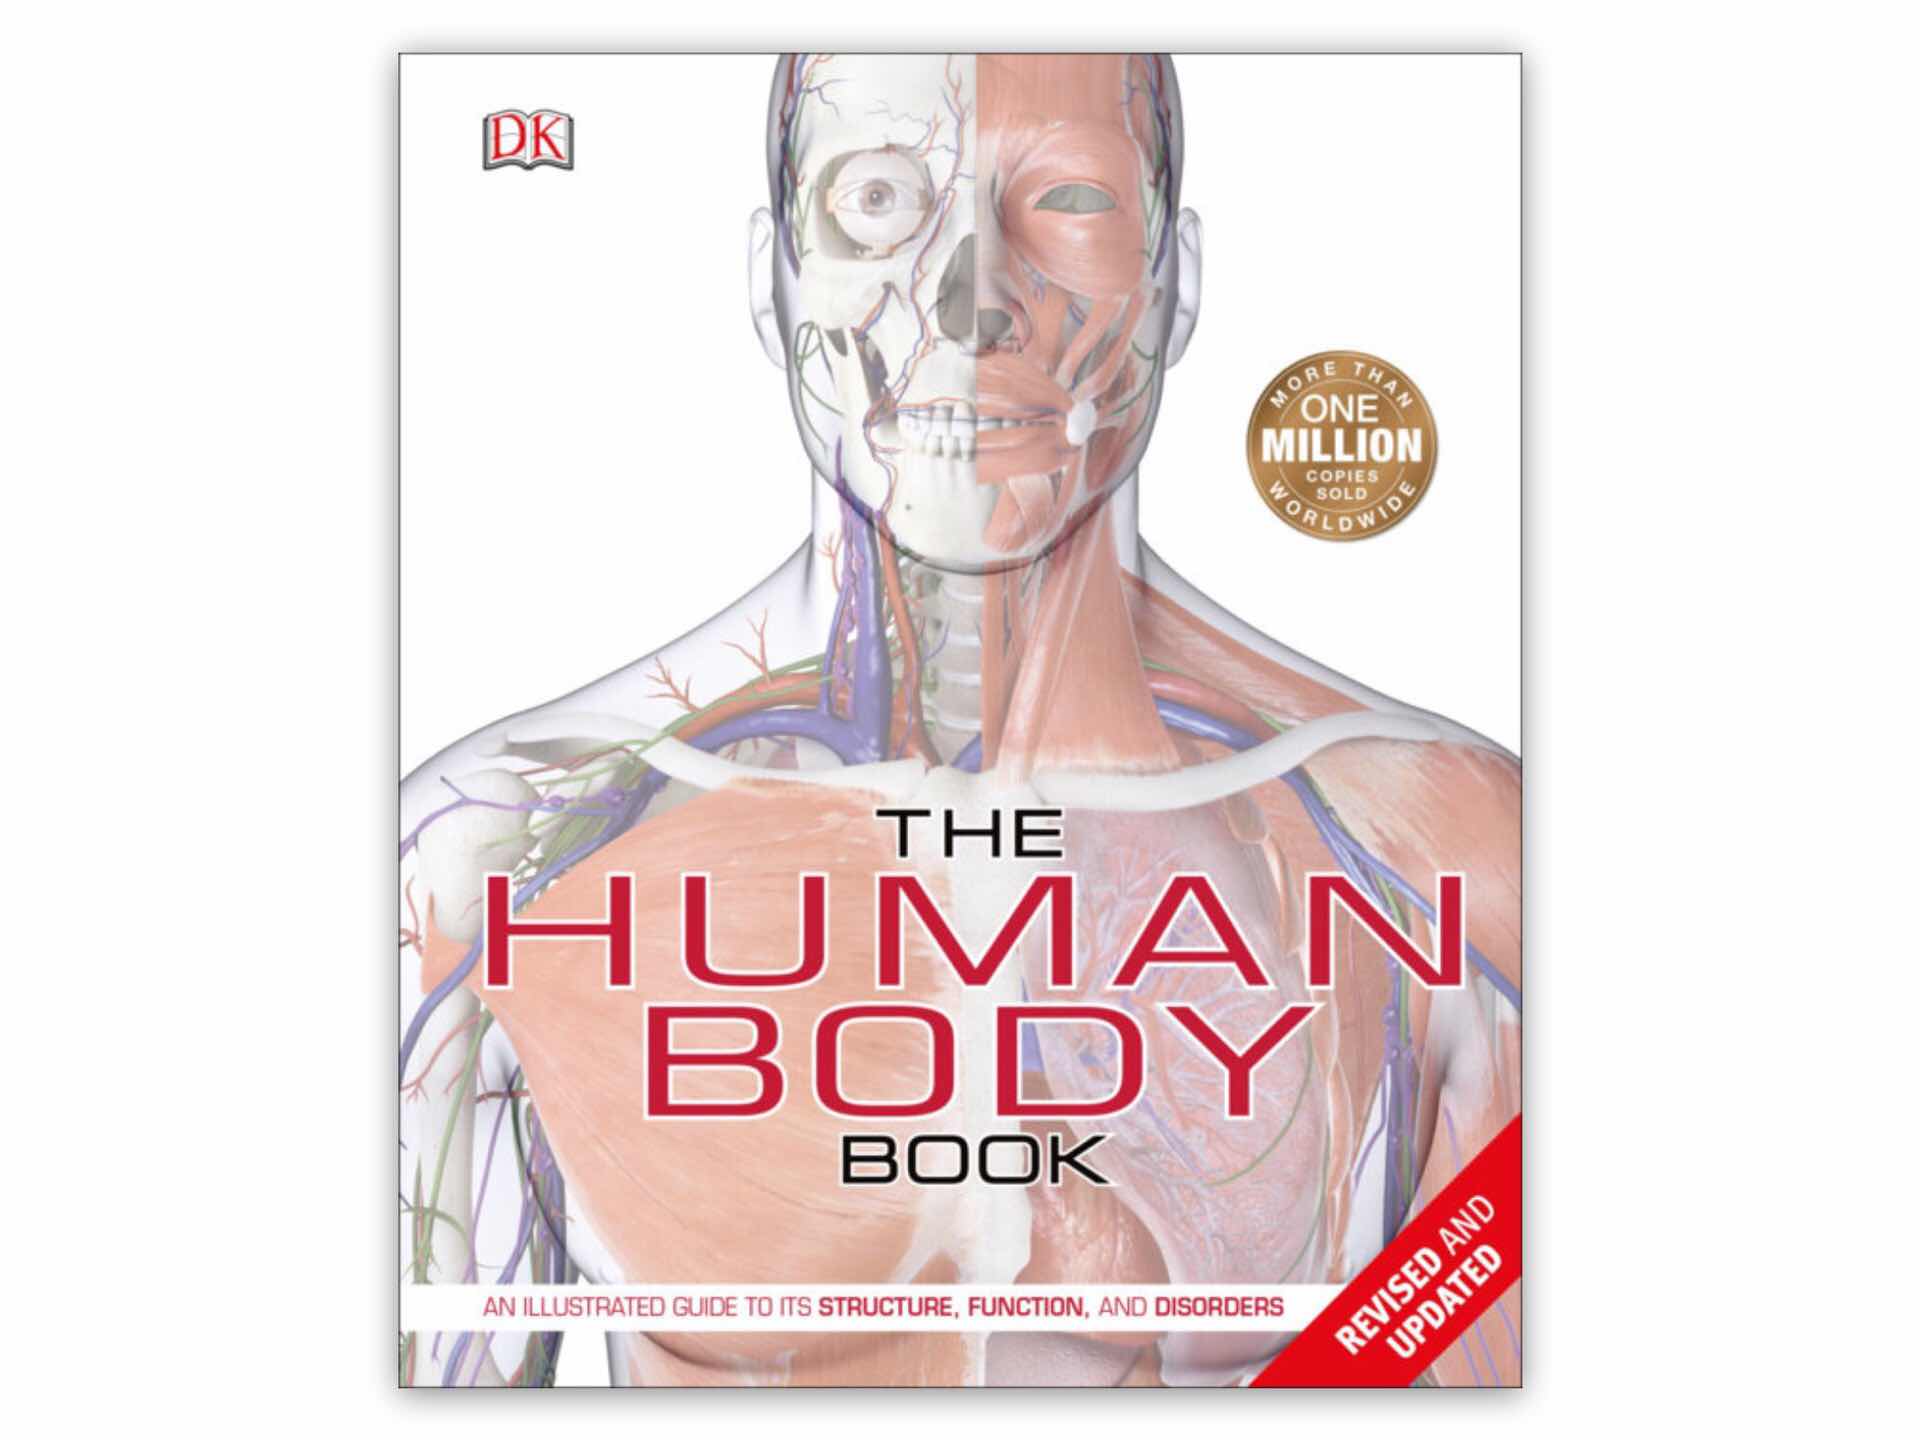 The Human Body Book, 3rd Edition by Richard Walker.